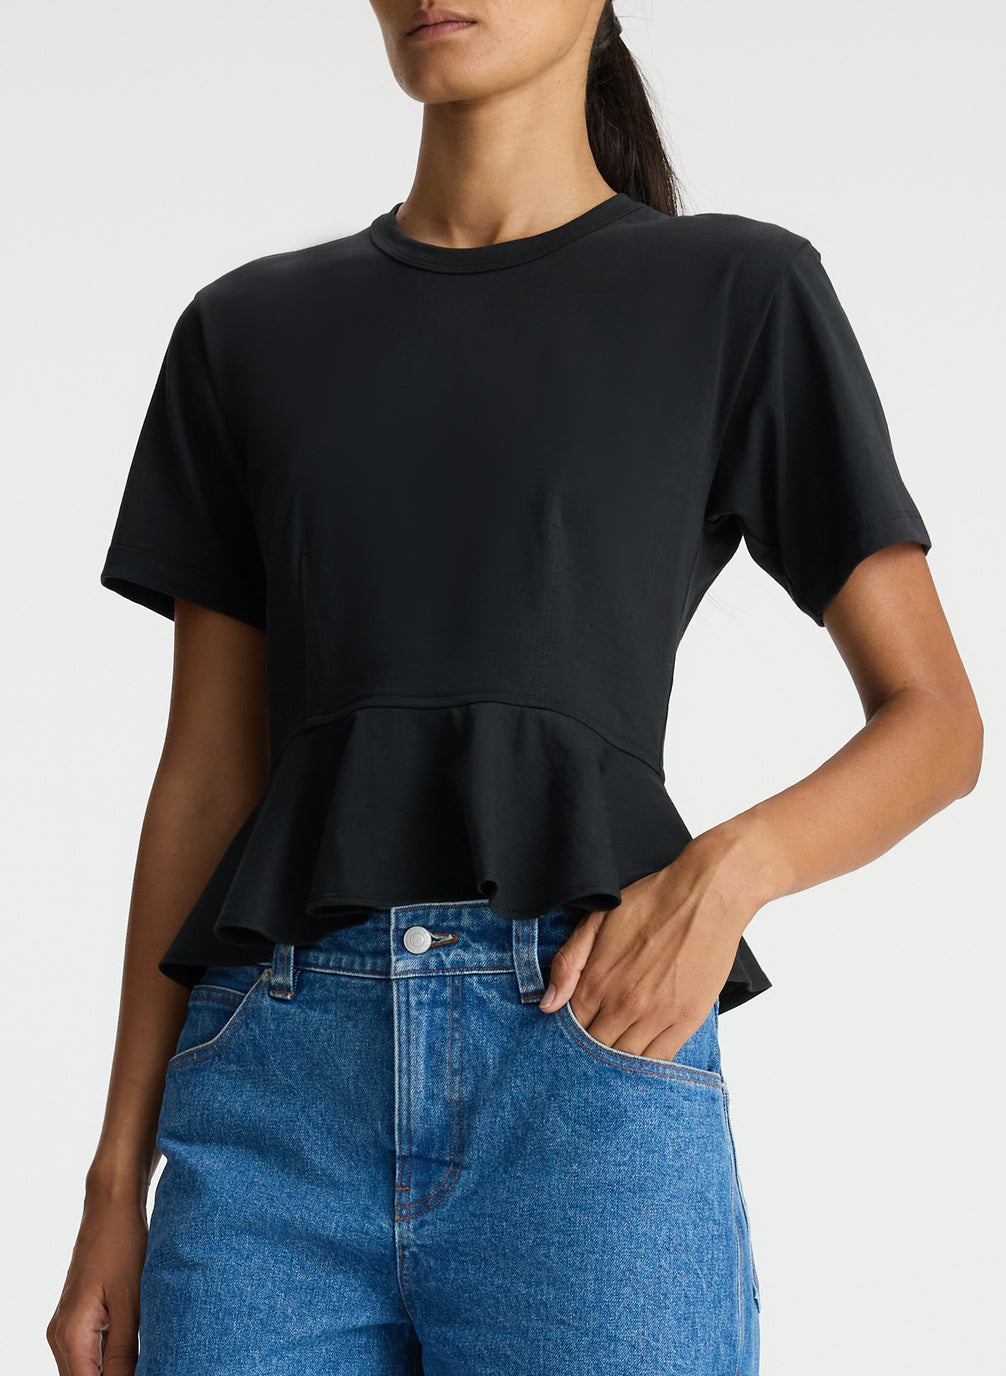 detail view of woman wearing black peplum tee and blue jeans